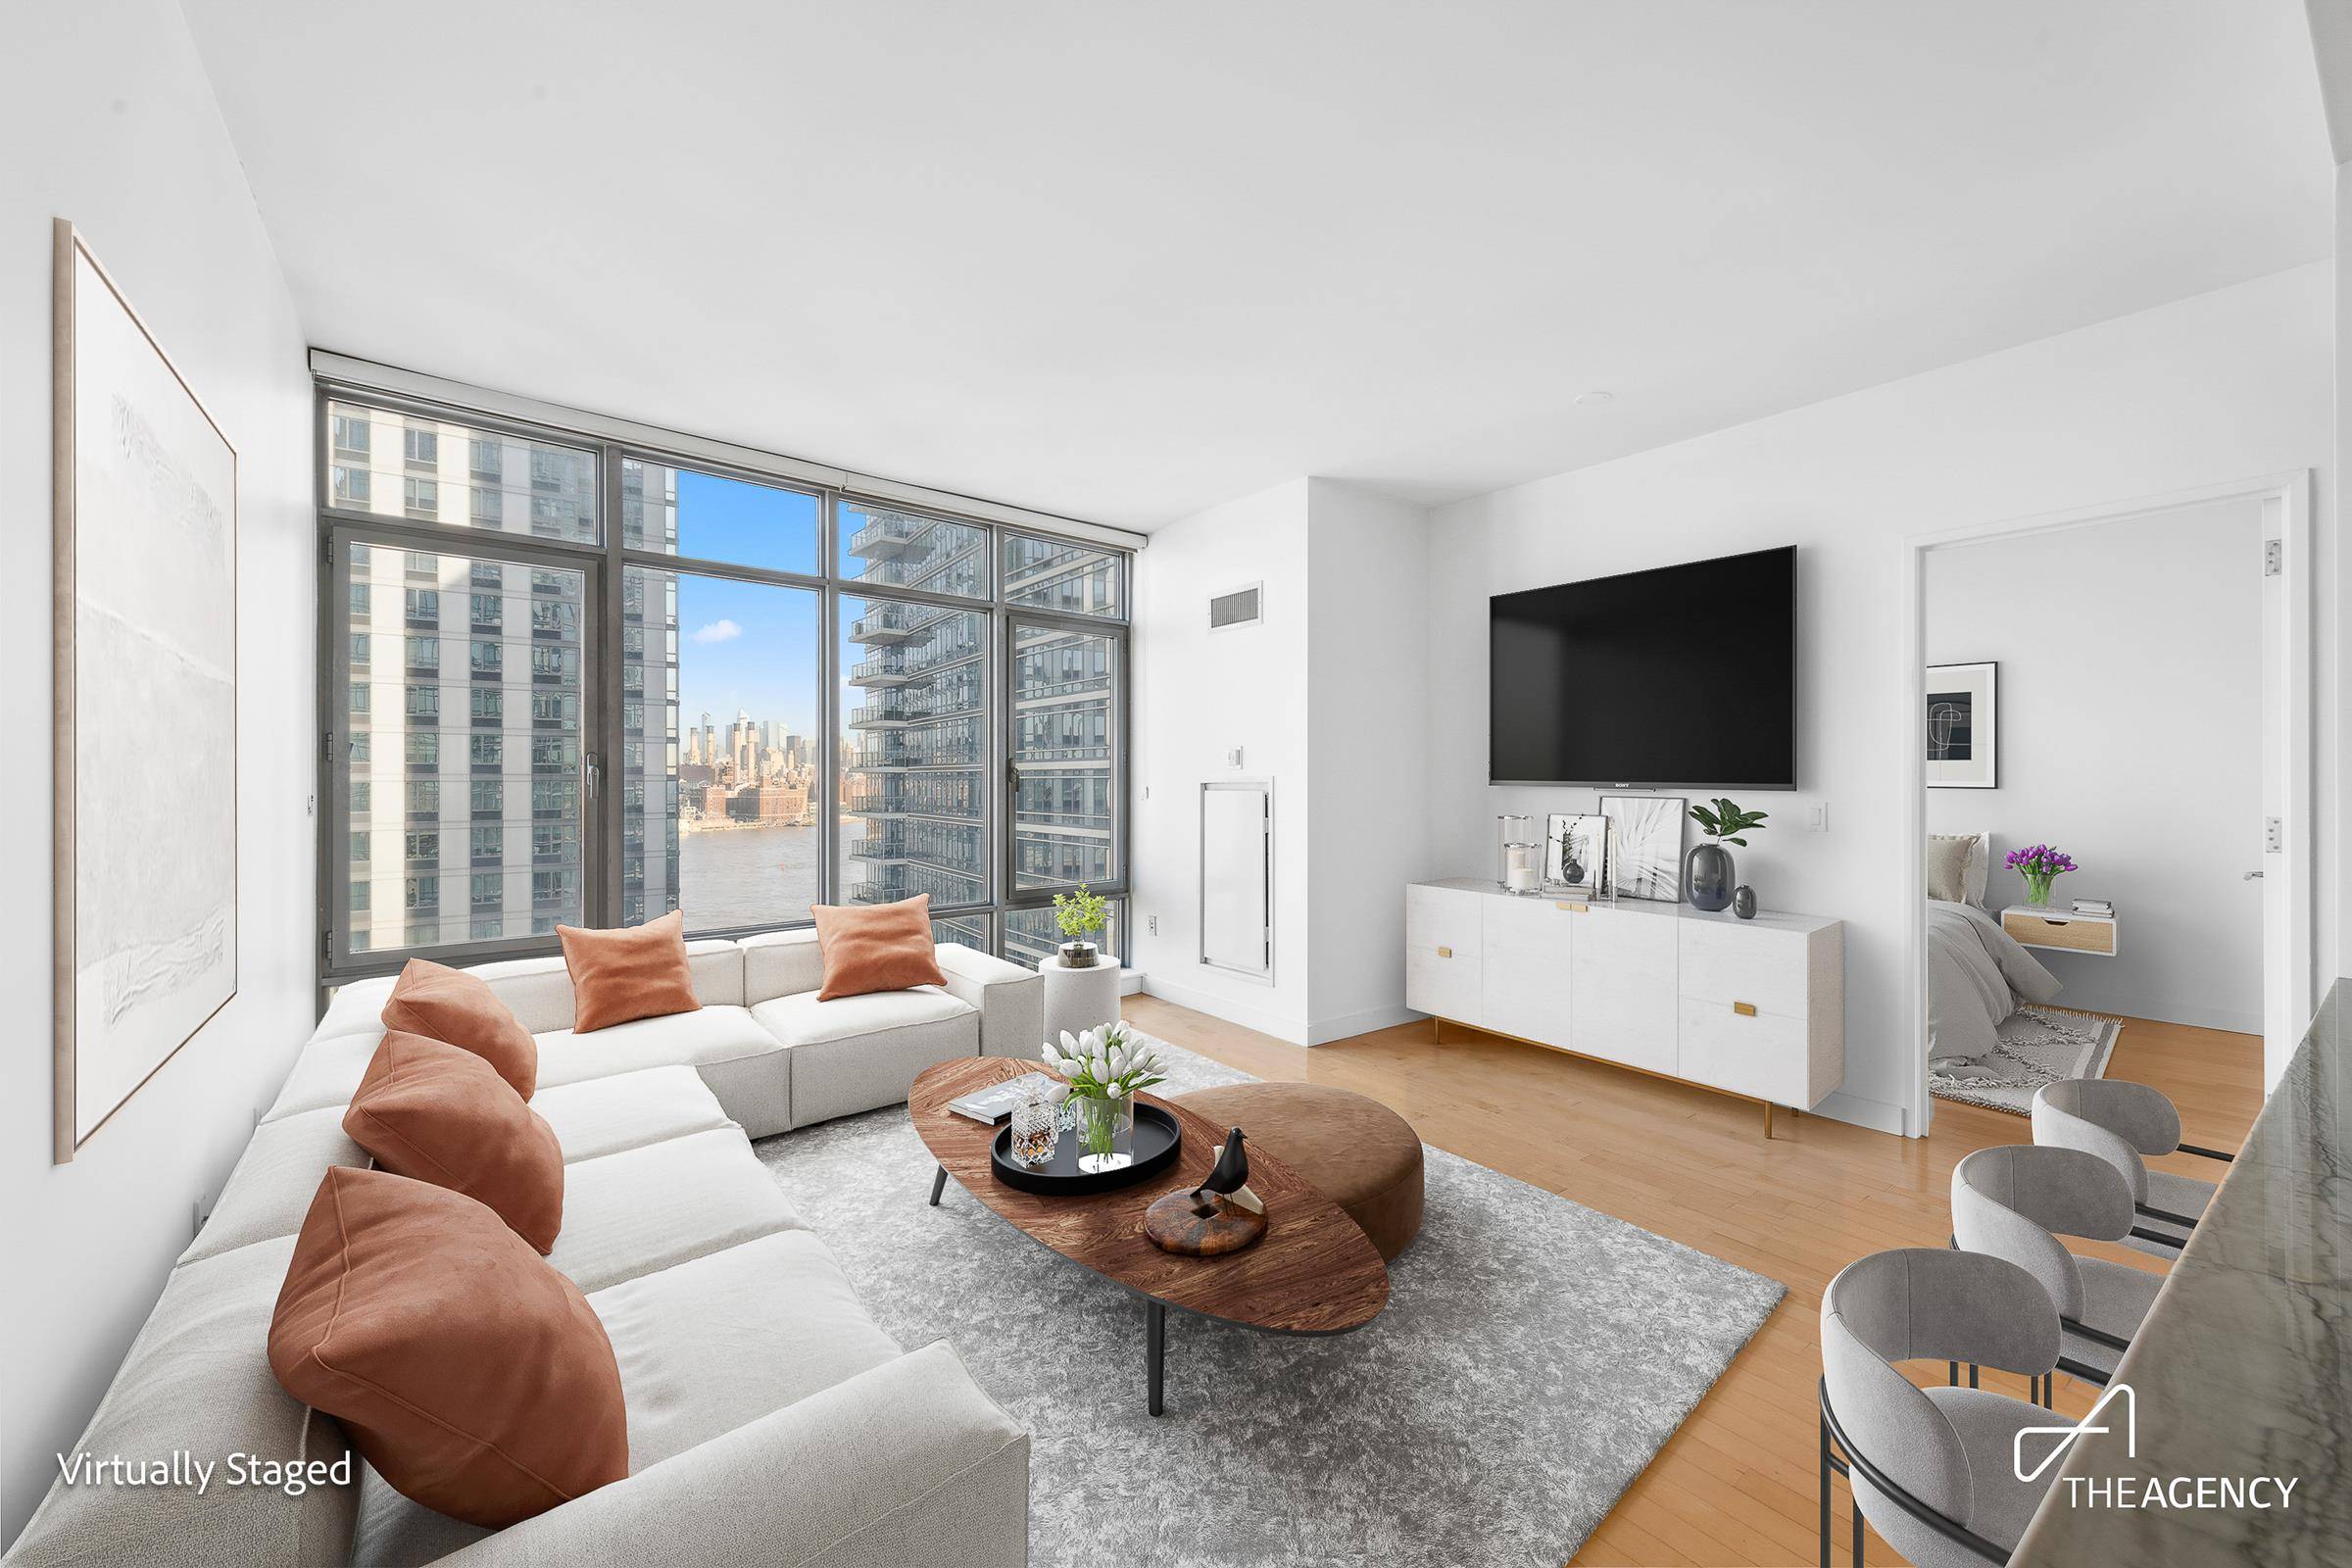 Presenting this expansive, sunlit one bedroom haven boasting southwest river and city vistas, nestled along the picturesque Williamsburg waterfront at Northside Piers.